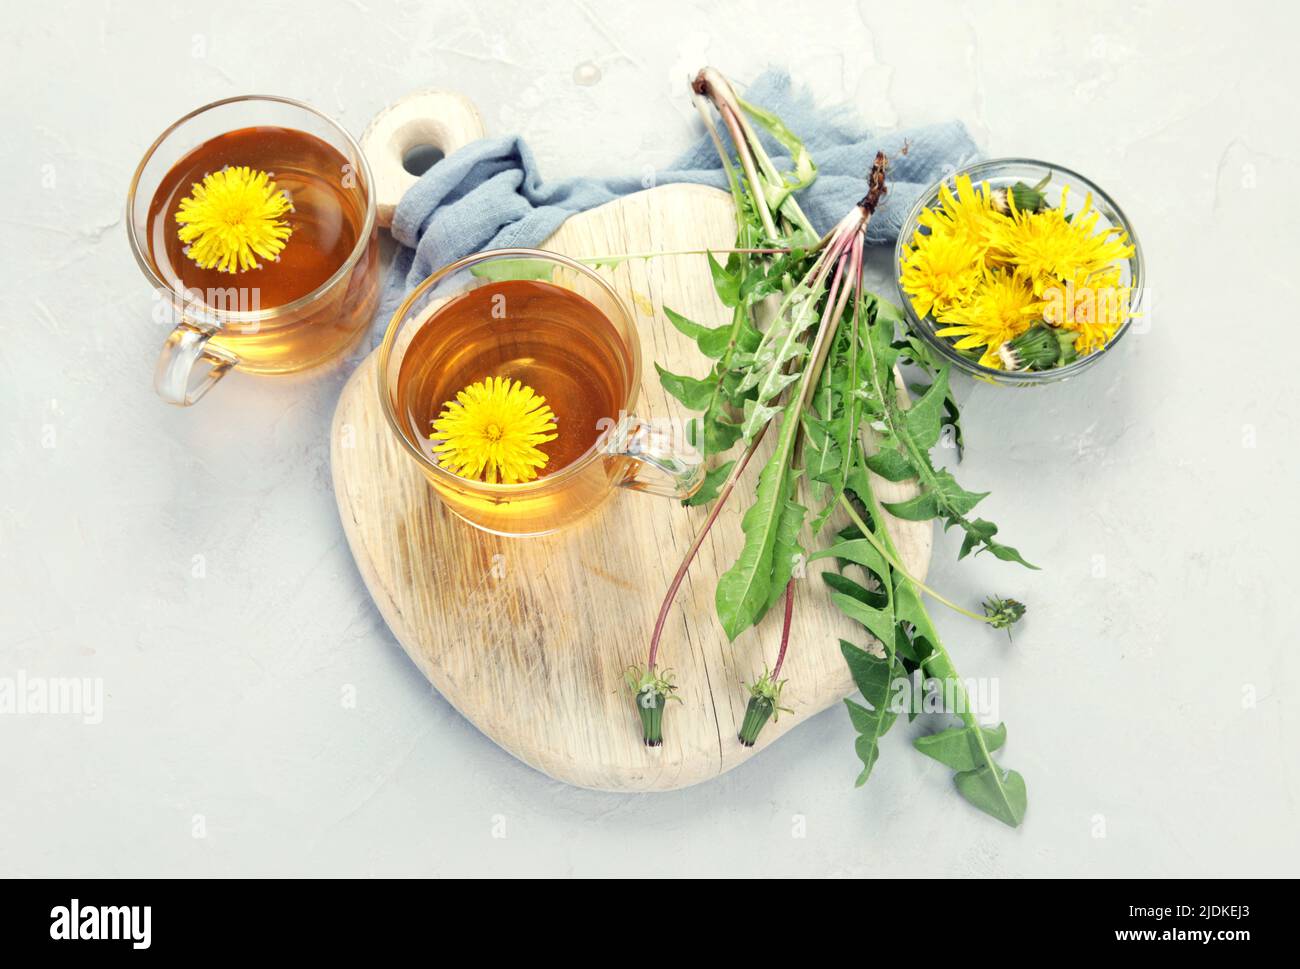 Delicious healthy tea made of dandelion flowers. Fragrant fresh herbs. Flat lay, top view, copy space Stock Photo